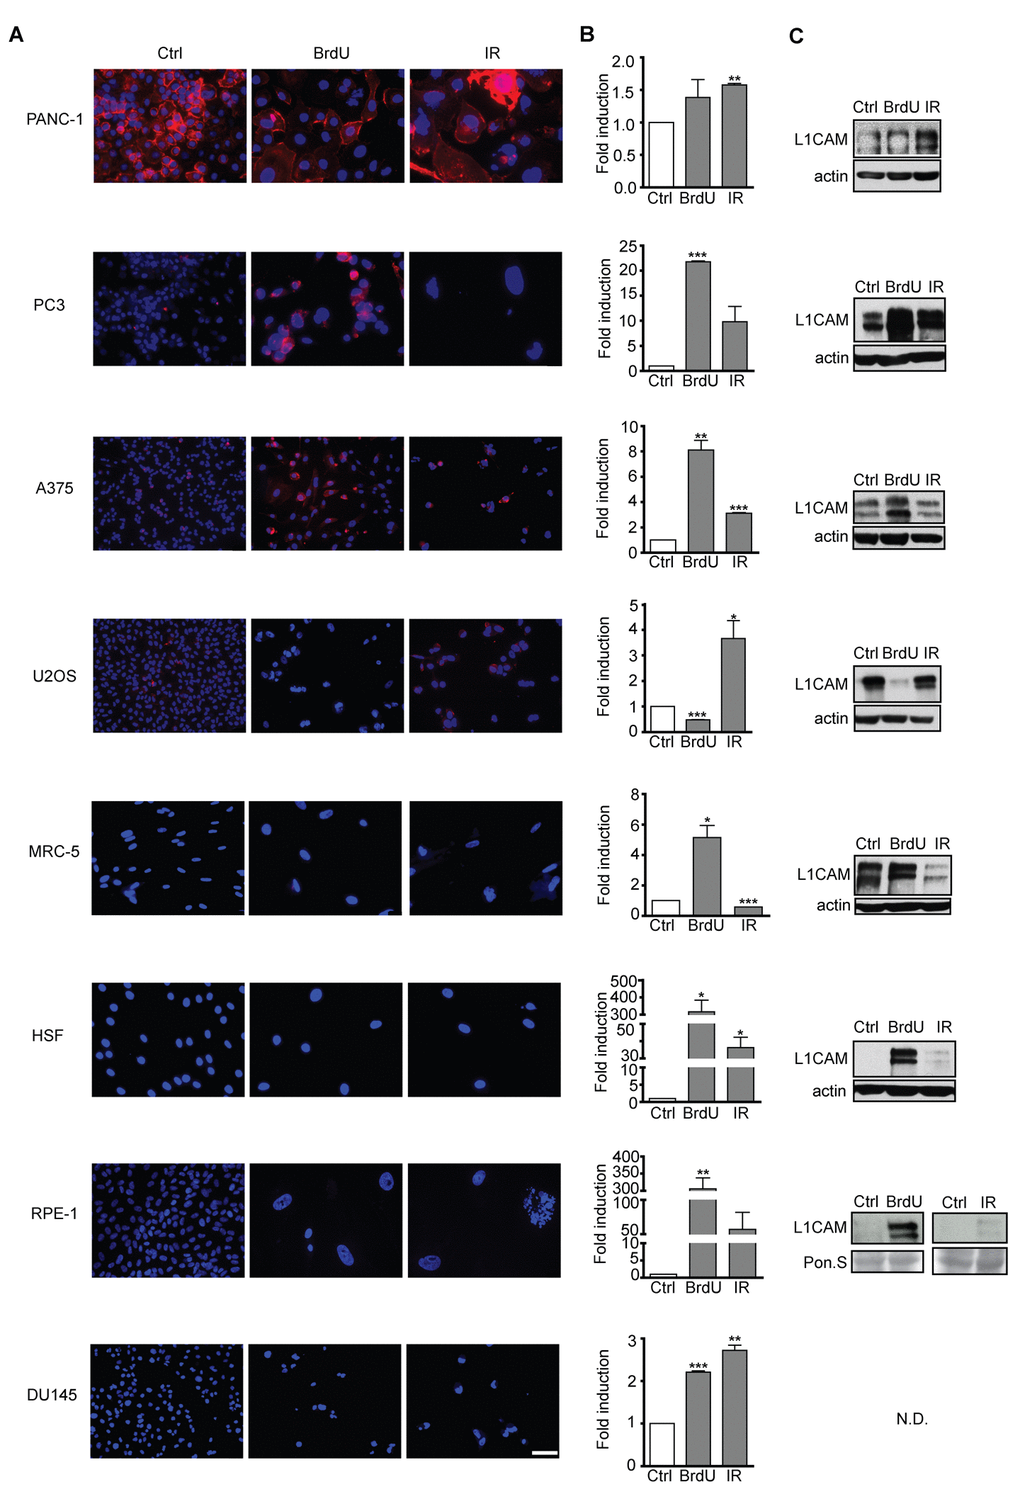 L1CAM expression in normal and tumor senescent cells depends on the cell type and senescence-inducing stimulus. Normal (MRC5, HSF), immortalized (RPE-1) and tumor (PANC-1, PC3, A375, U2OS, and DU145) cells were brought to senescence either by BrdU (10 μM for A375, 100 μM for rest of cell types) or IR (10 Gy) and assayed for cell surface L1CAM protein expression by live cell immunostaining with L1CAM antibodies. (A) L1CAM mRNA expression by real time RT-qPCR quantification (B) and total L1CAM protein level by immunoblotting (C). GAPDH was used as a reference gene; β-actin was used as a loading control. The values representing two independent experiments are shown as a fold induction relative to control. N.D., not detected. Scale bar, 50 μm.